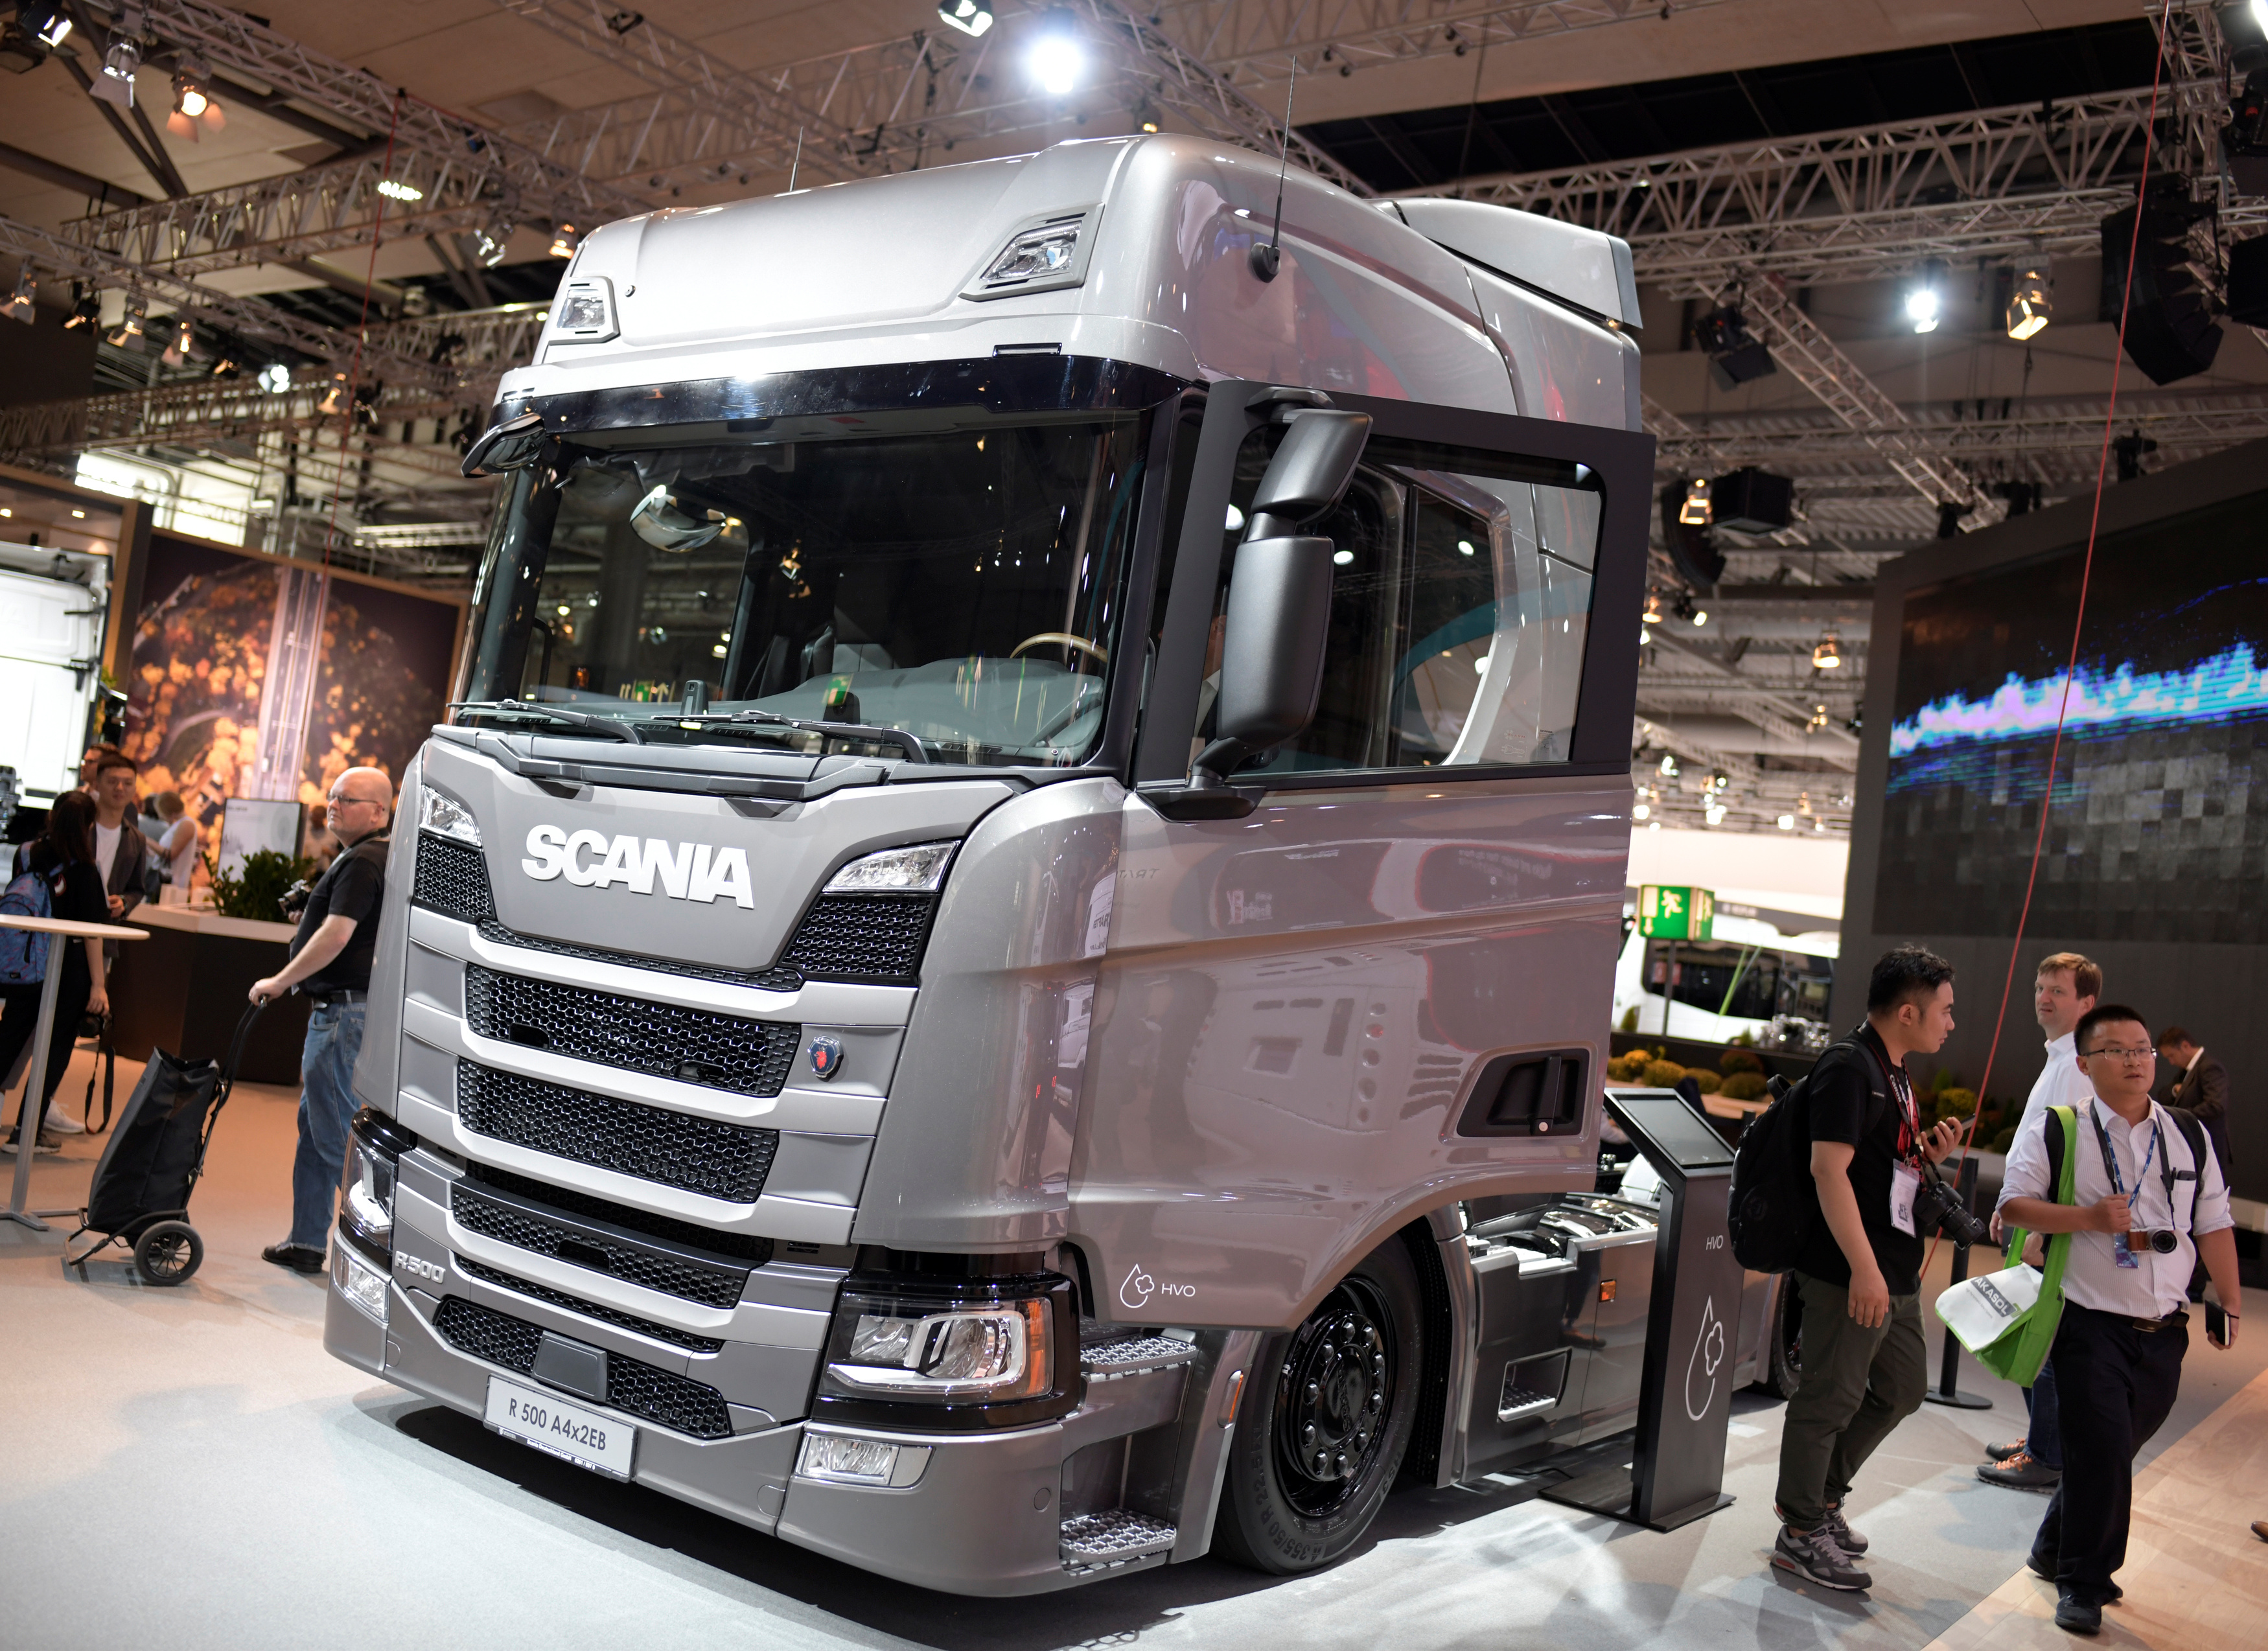 Truck of Swedish company Scania is pictured in Hanover